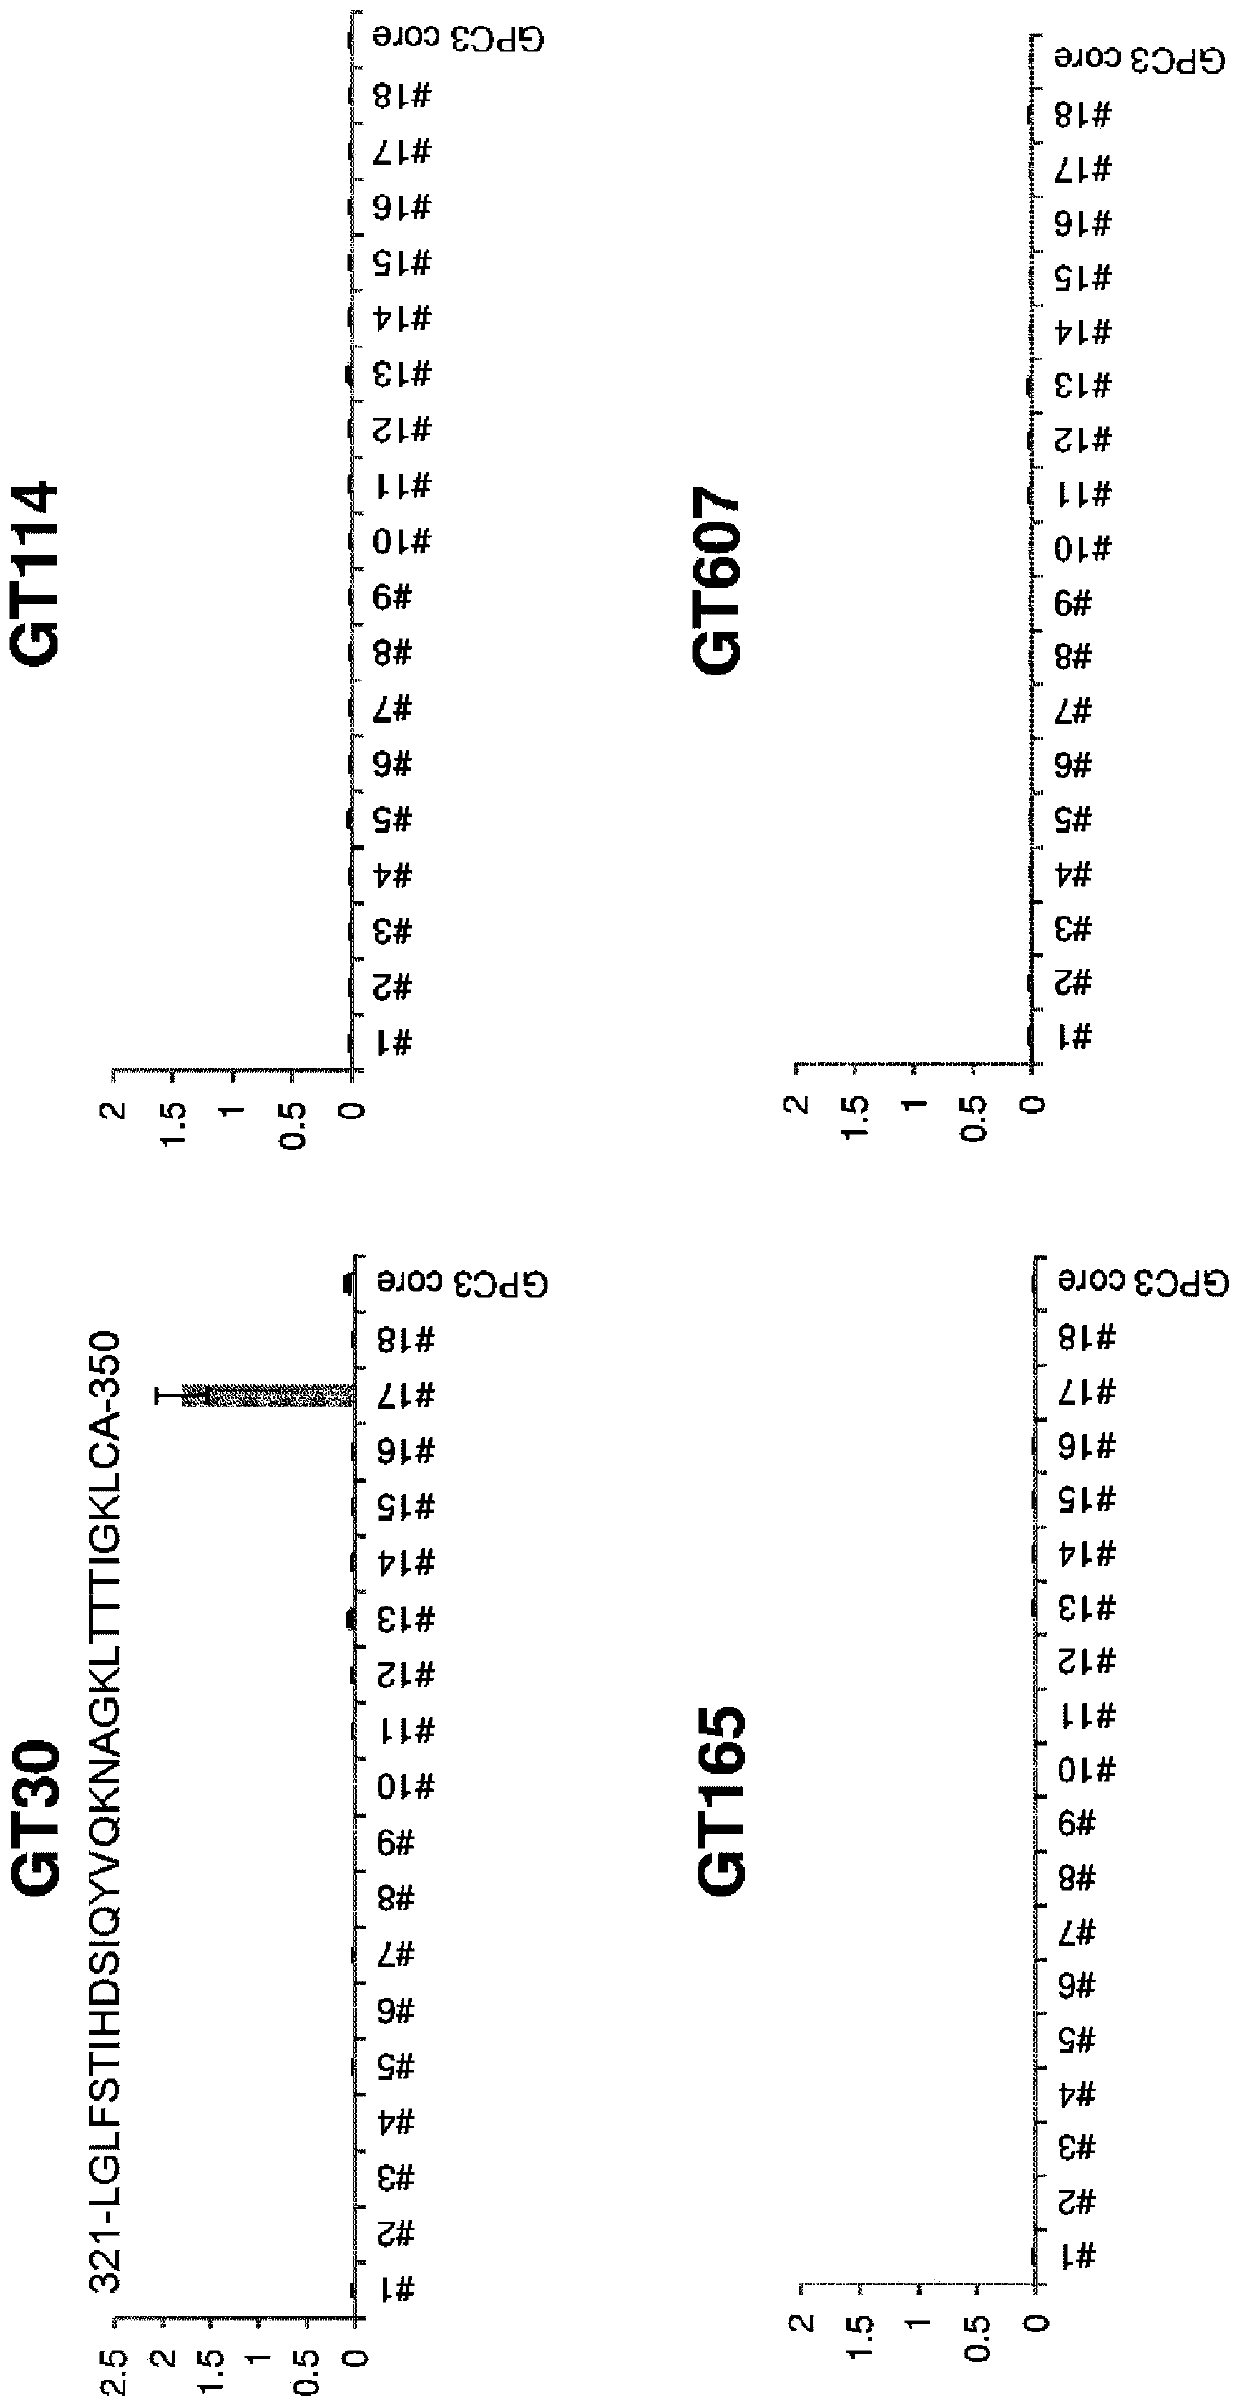 Method for the determination of soluble gpc3 protein